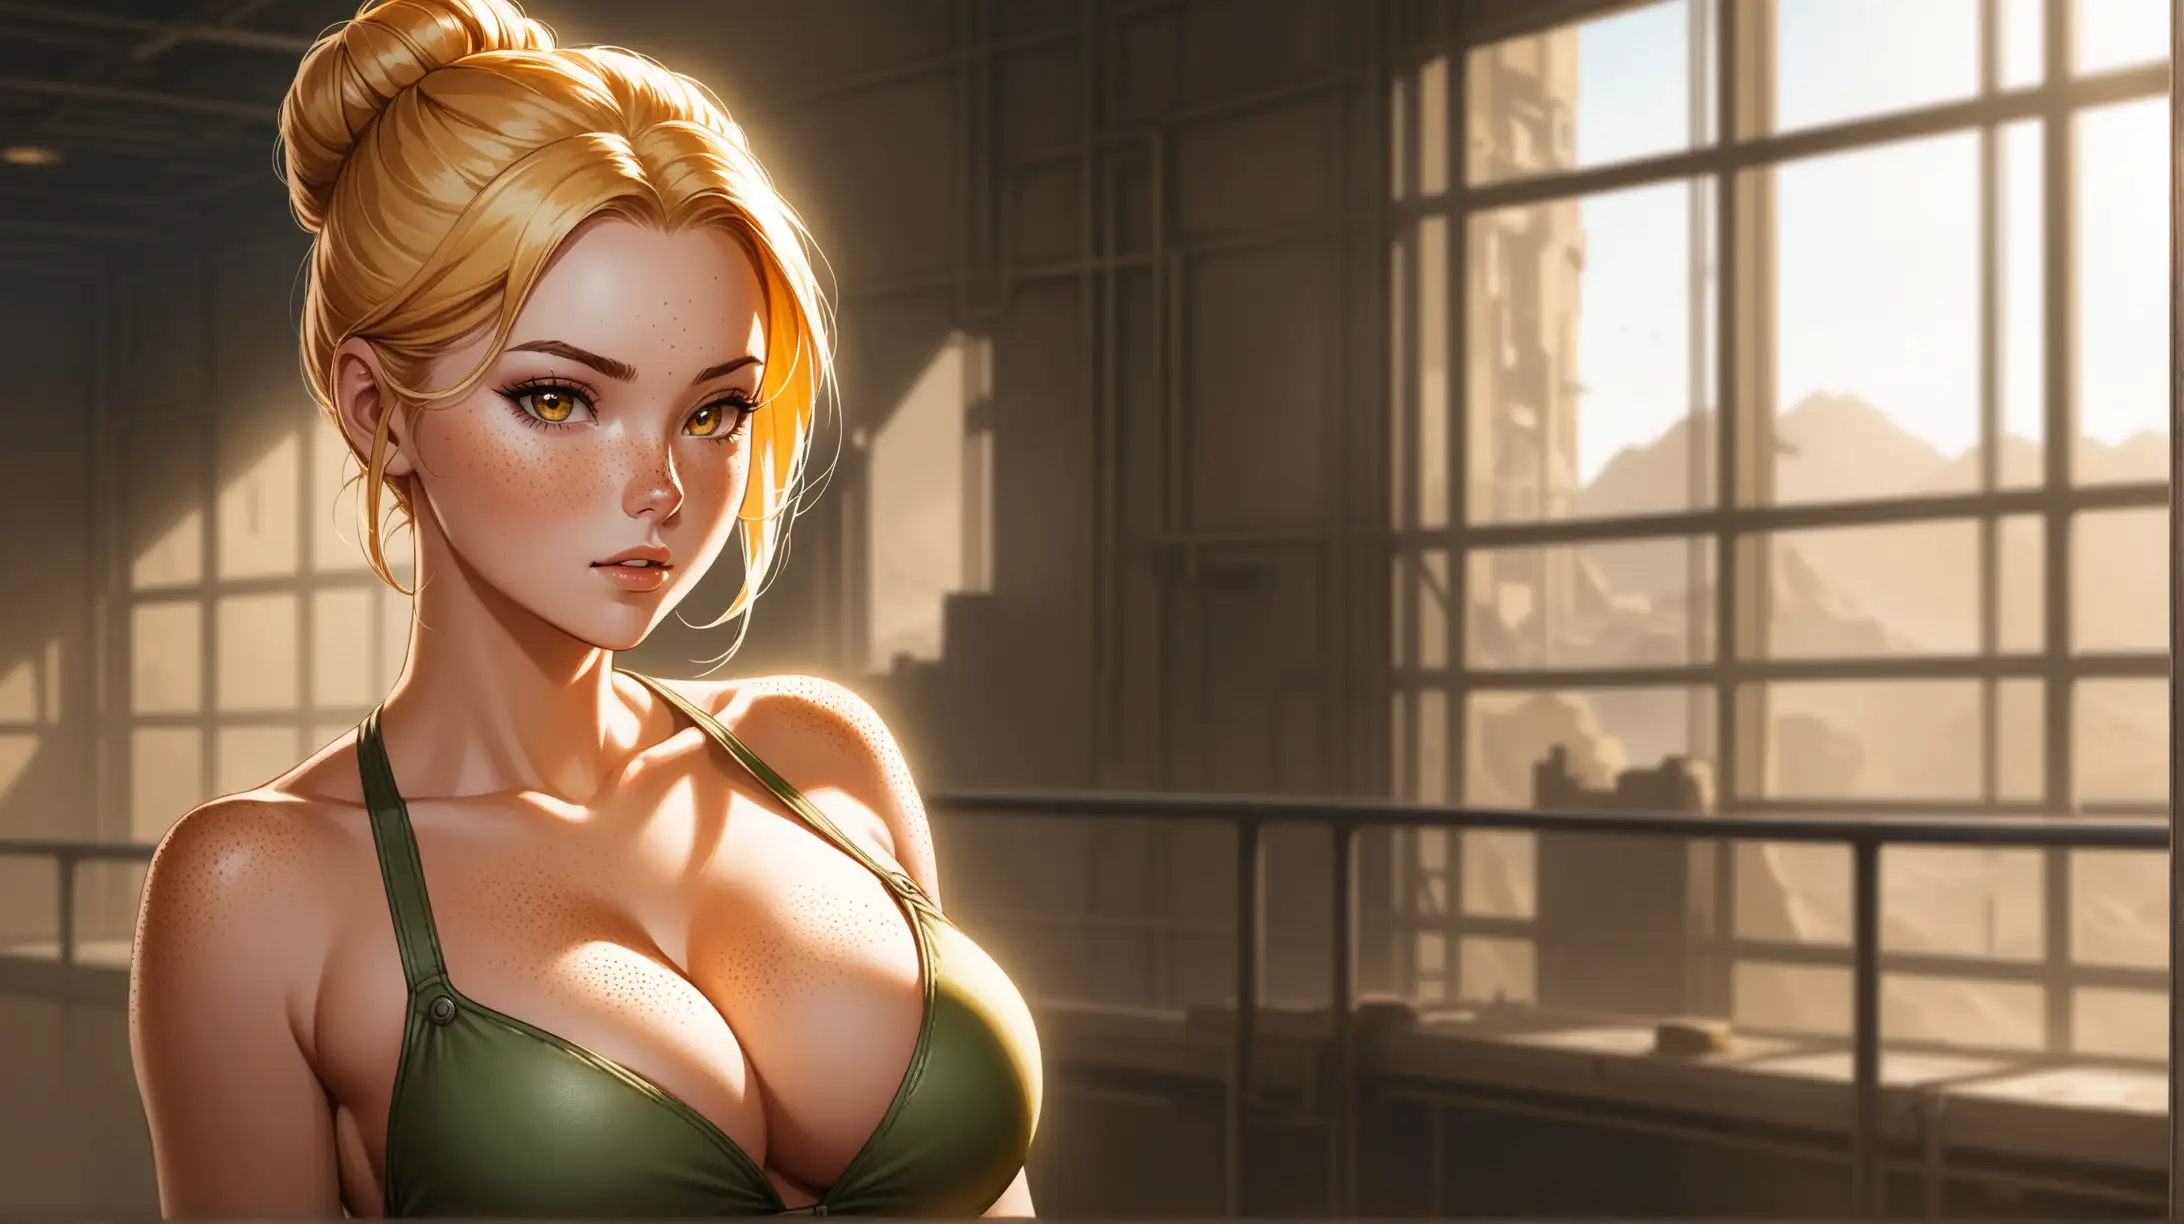 Draw a woman, long blonde hair in a bun, gold eyes, freckles, perky figure, outfit inspired from the Fallout series, high quality, cowboy shot, indoors, seductive, cleavage, natural lighting, adoring gaze toward the viewer